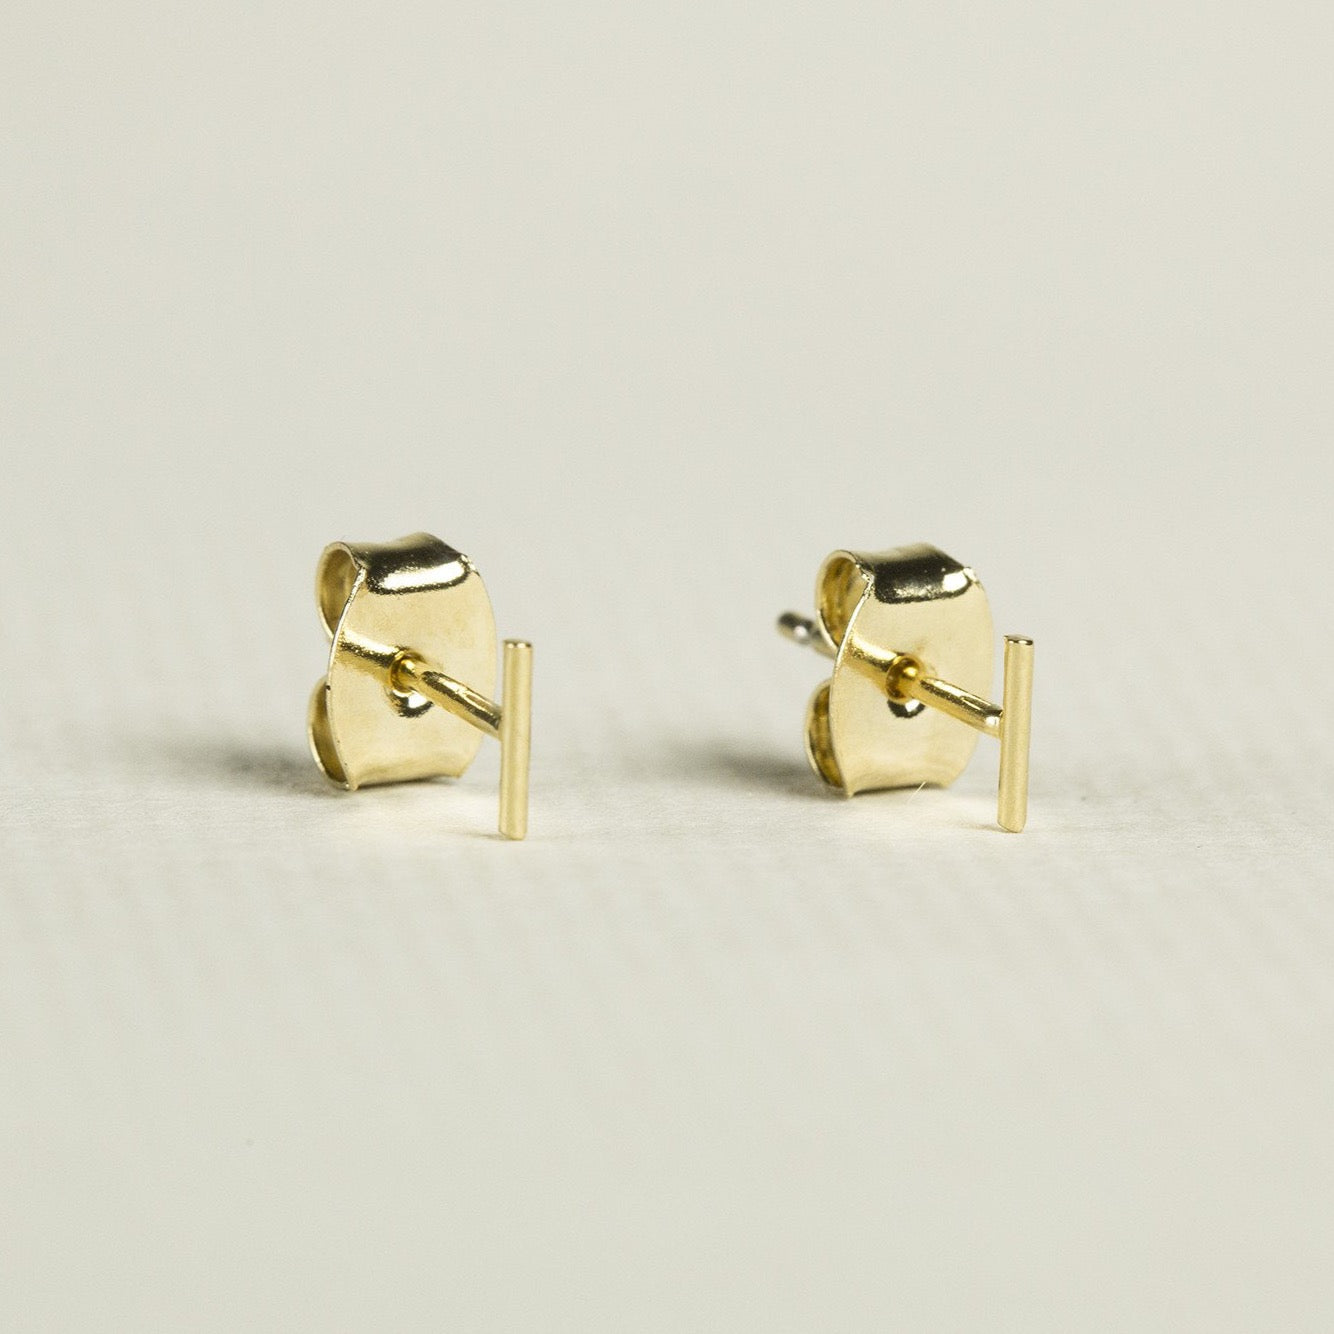 adorable little bars to compliment any ensemble 